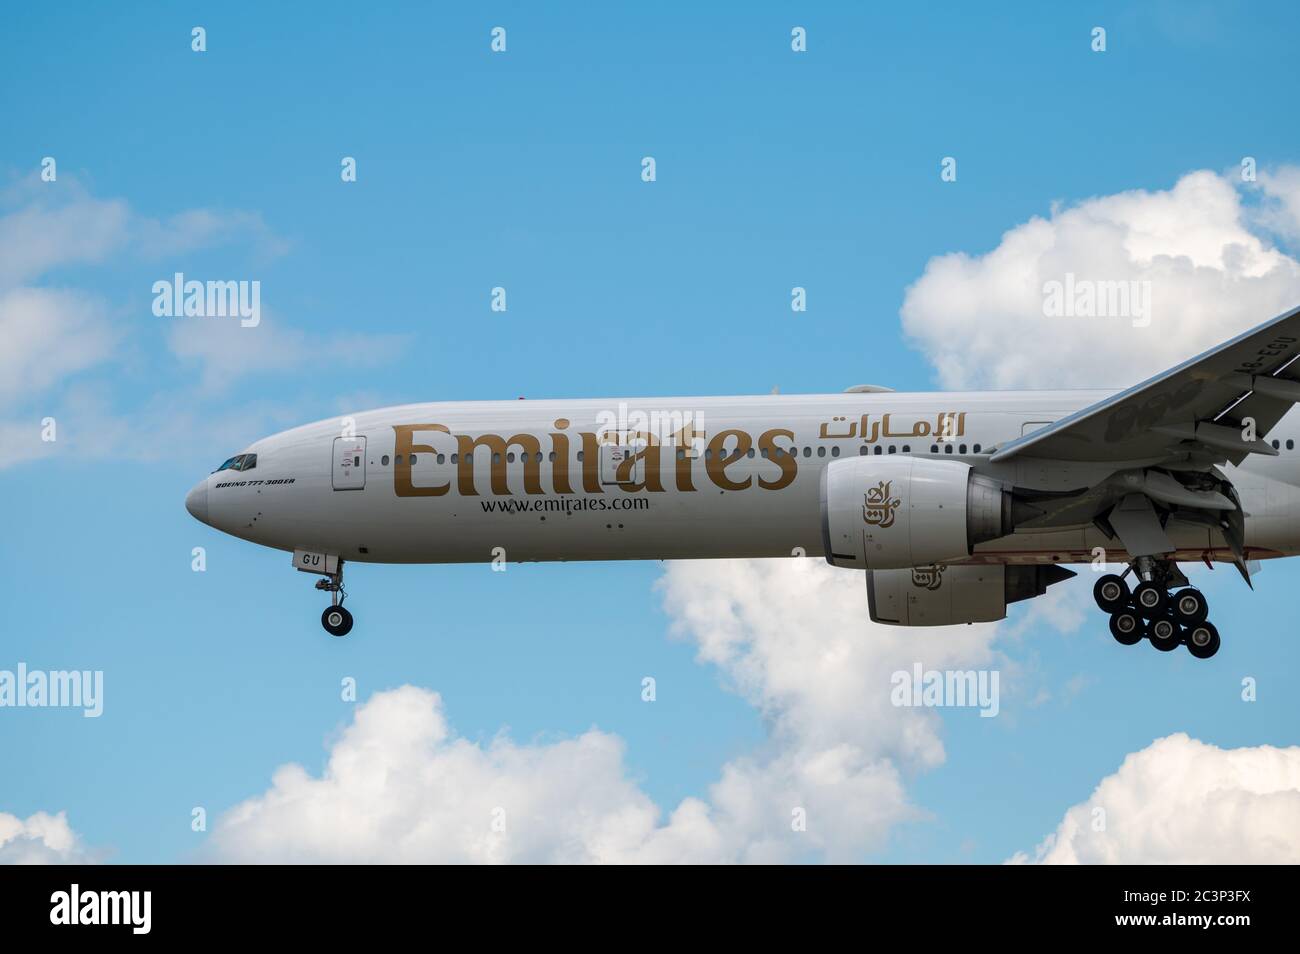 Emirates Airline Boeing 777-300ER wide body aircraft A6-EGU approaching to land at EDDF Frankfurt airport in Germany Stock Photo